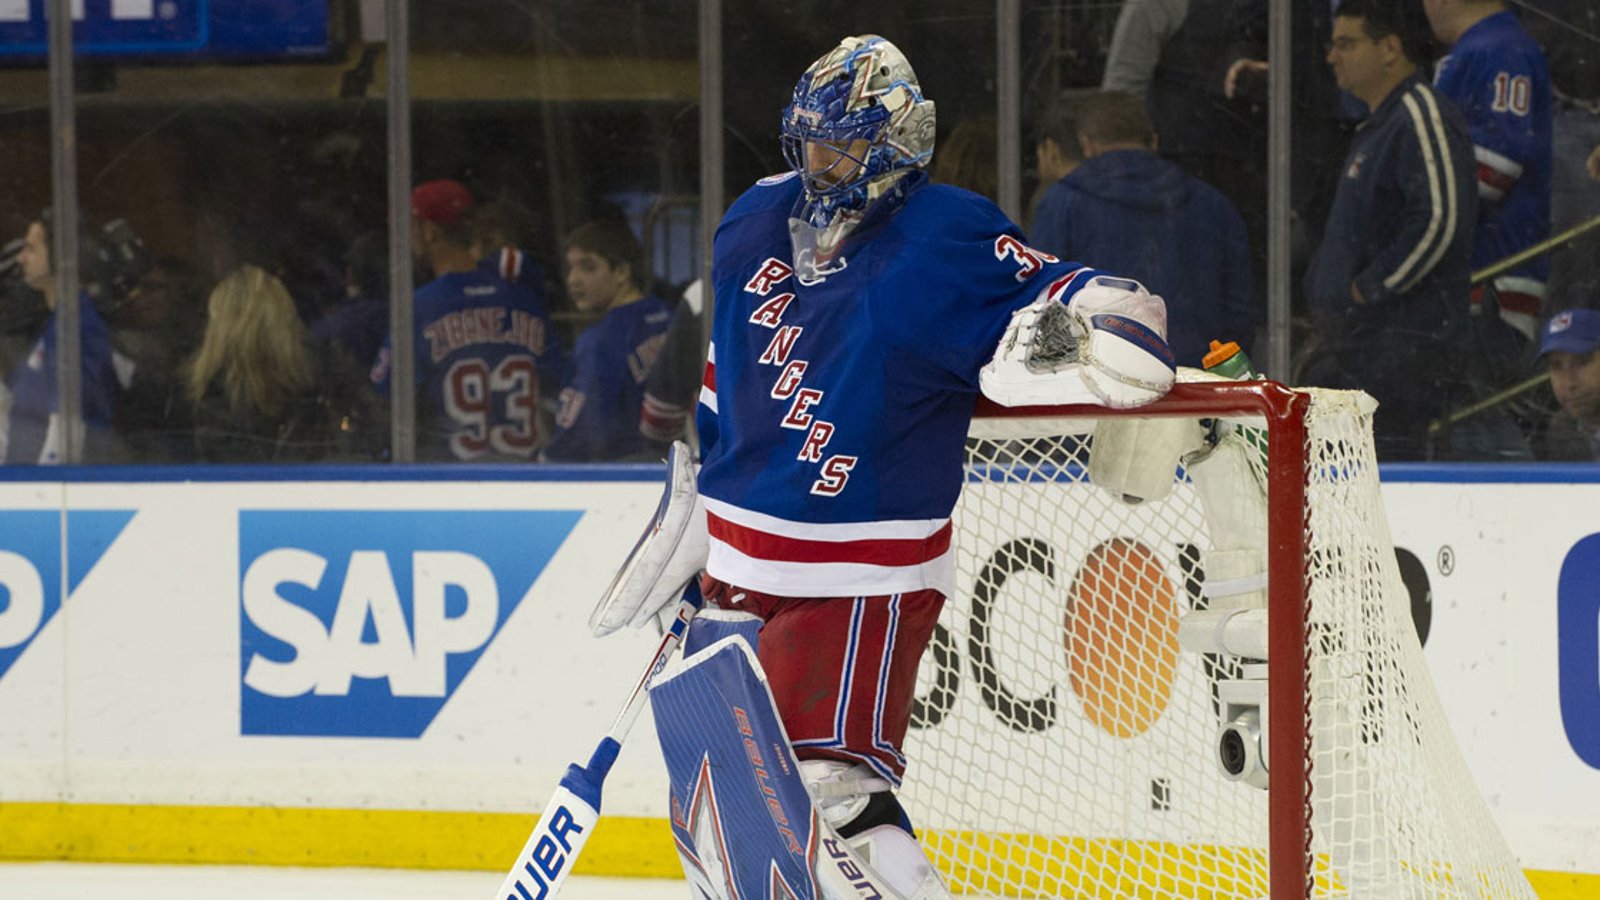 The Rangers “aren't ready, aren't checked in” says NHL Network 